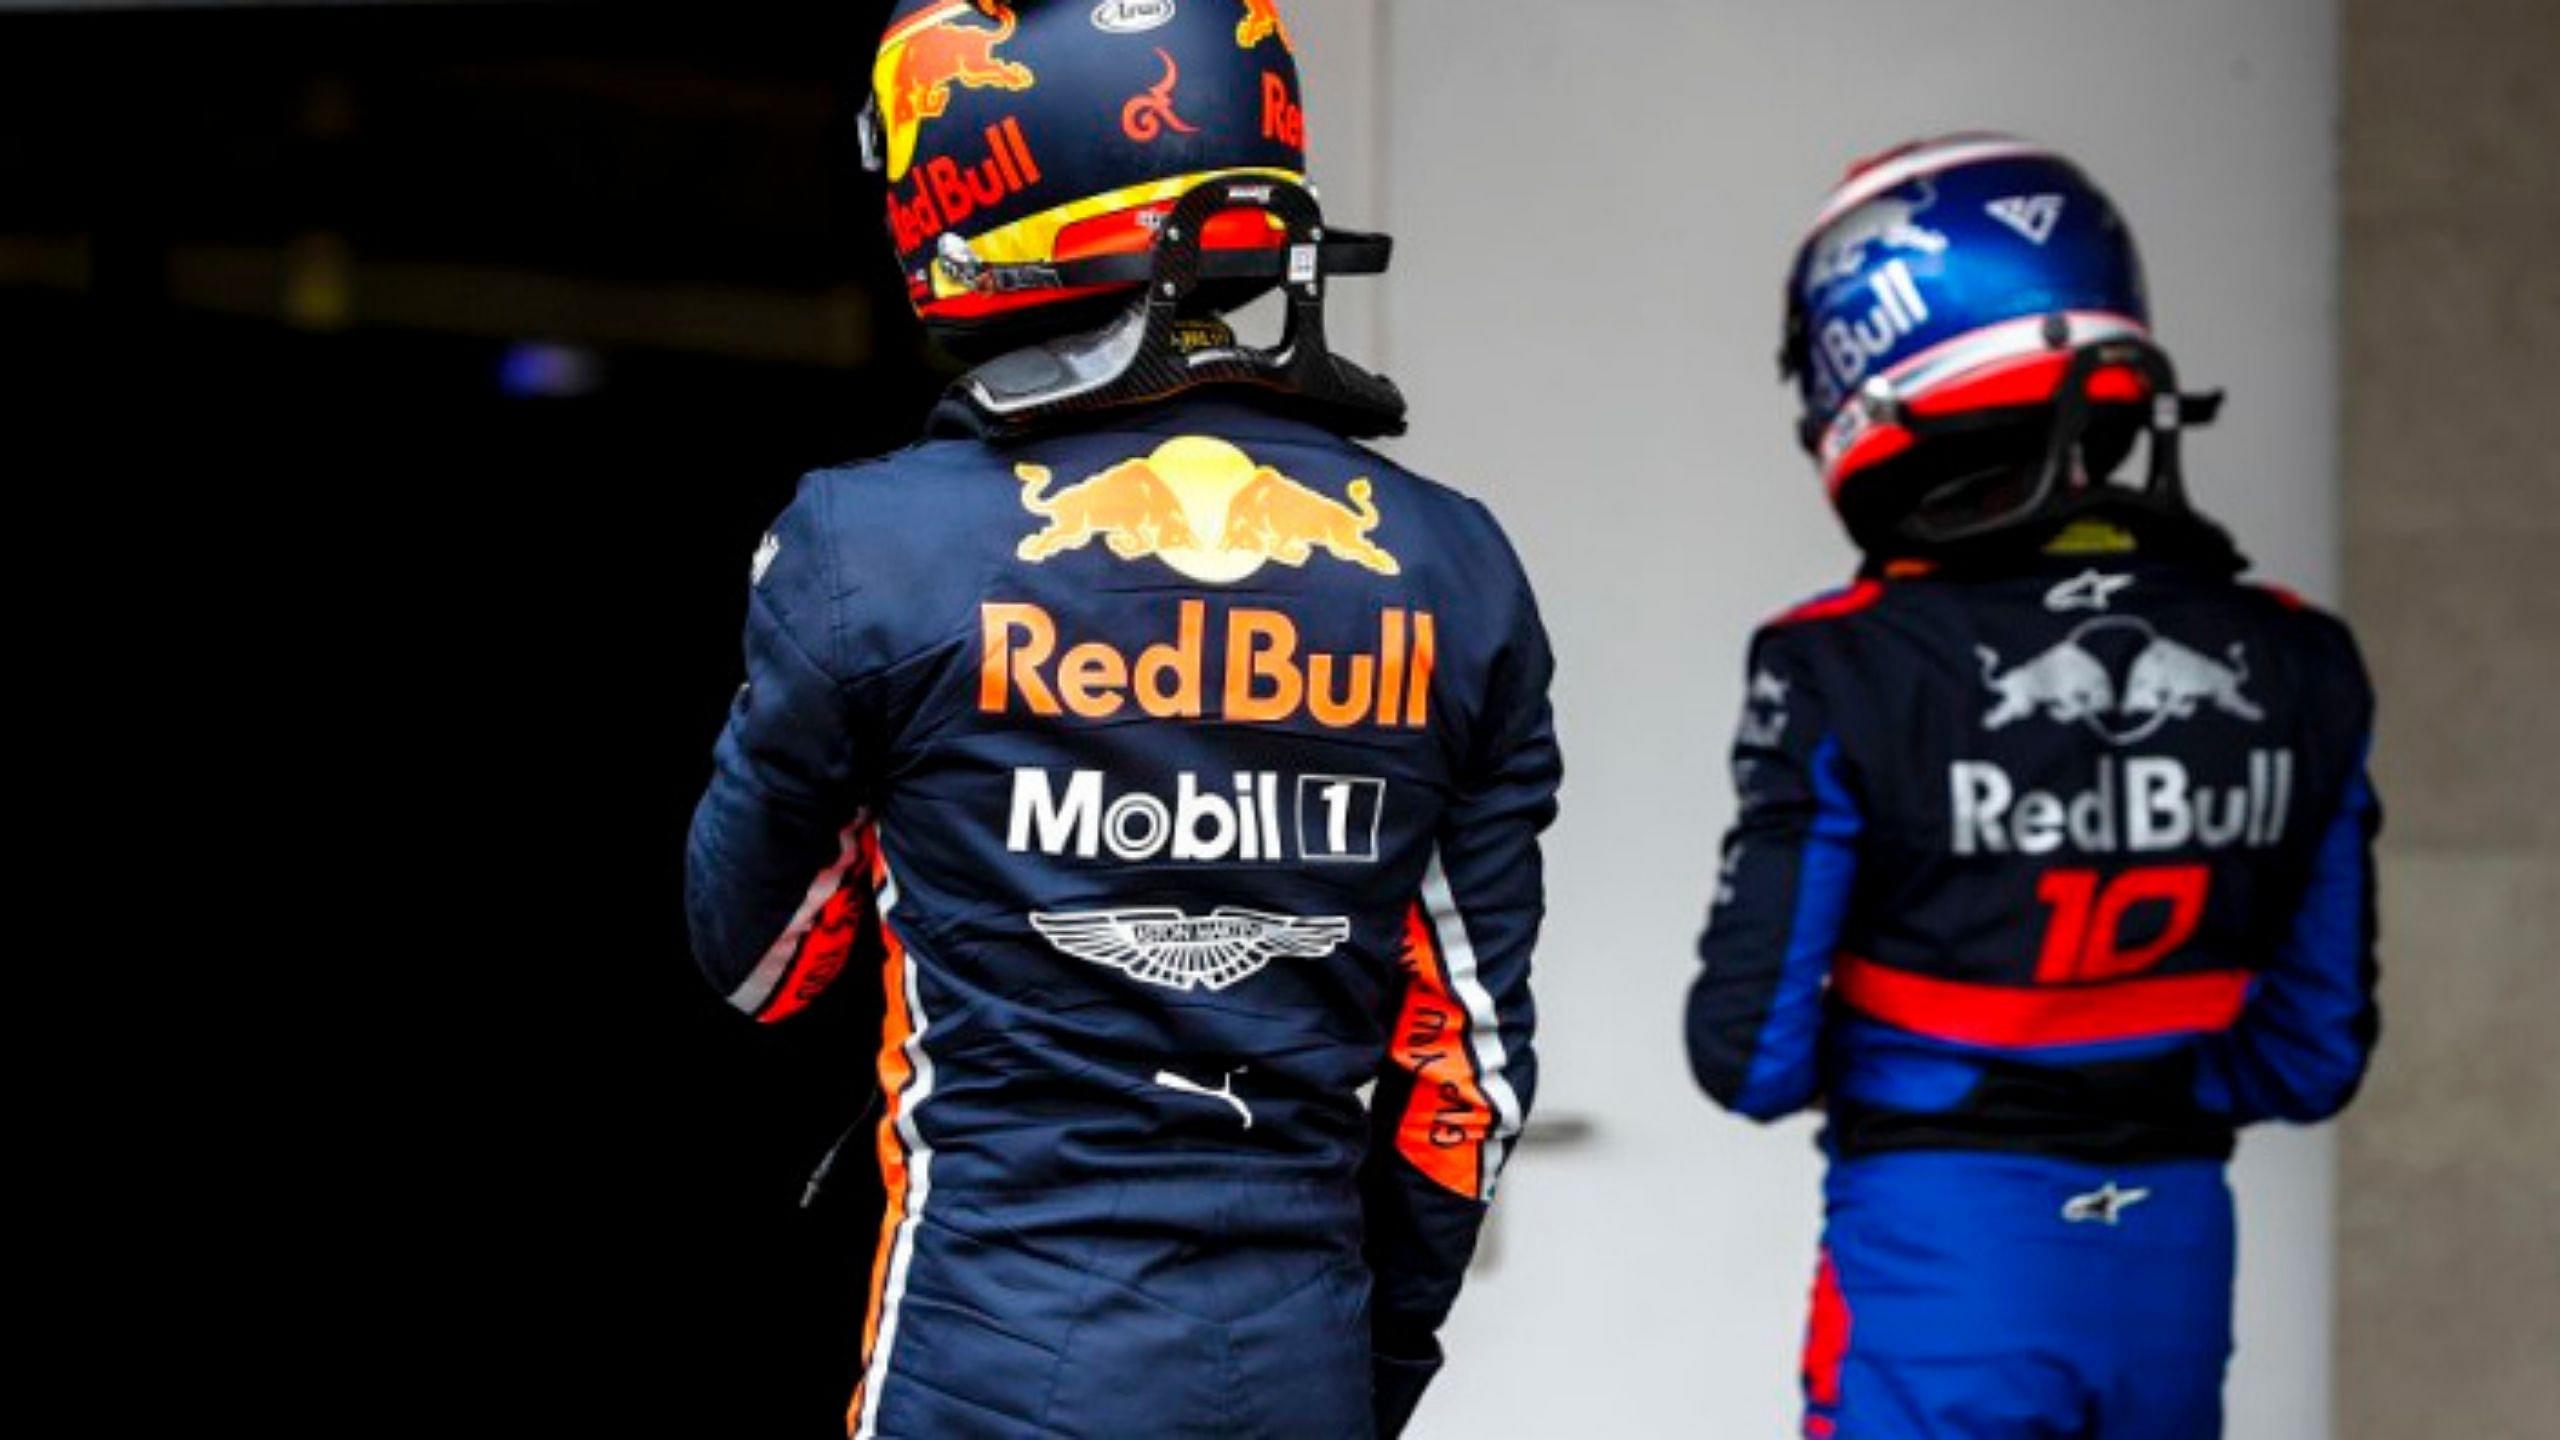 "I do not understand how good drivers have to pay to race" - Former Red Bull driver disillusioned with the current generation of Formula 1